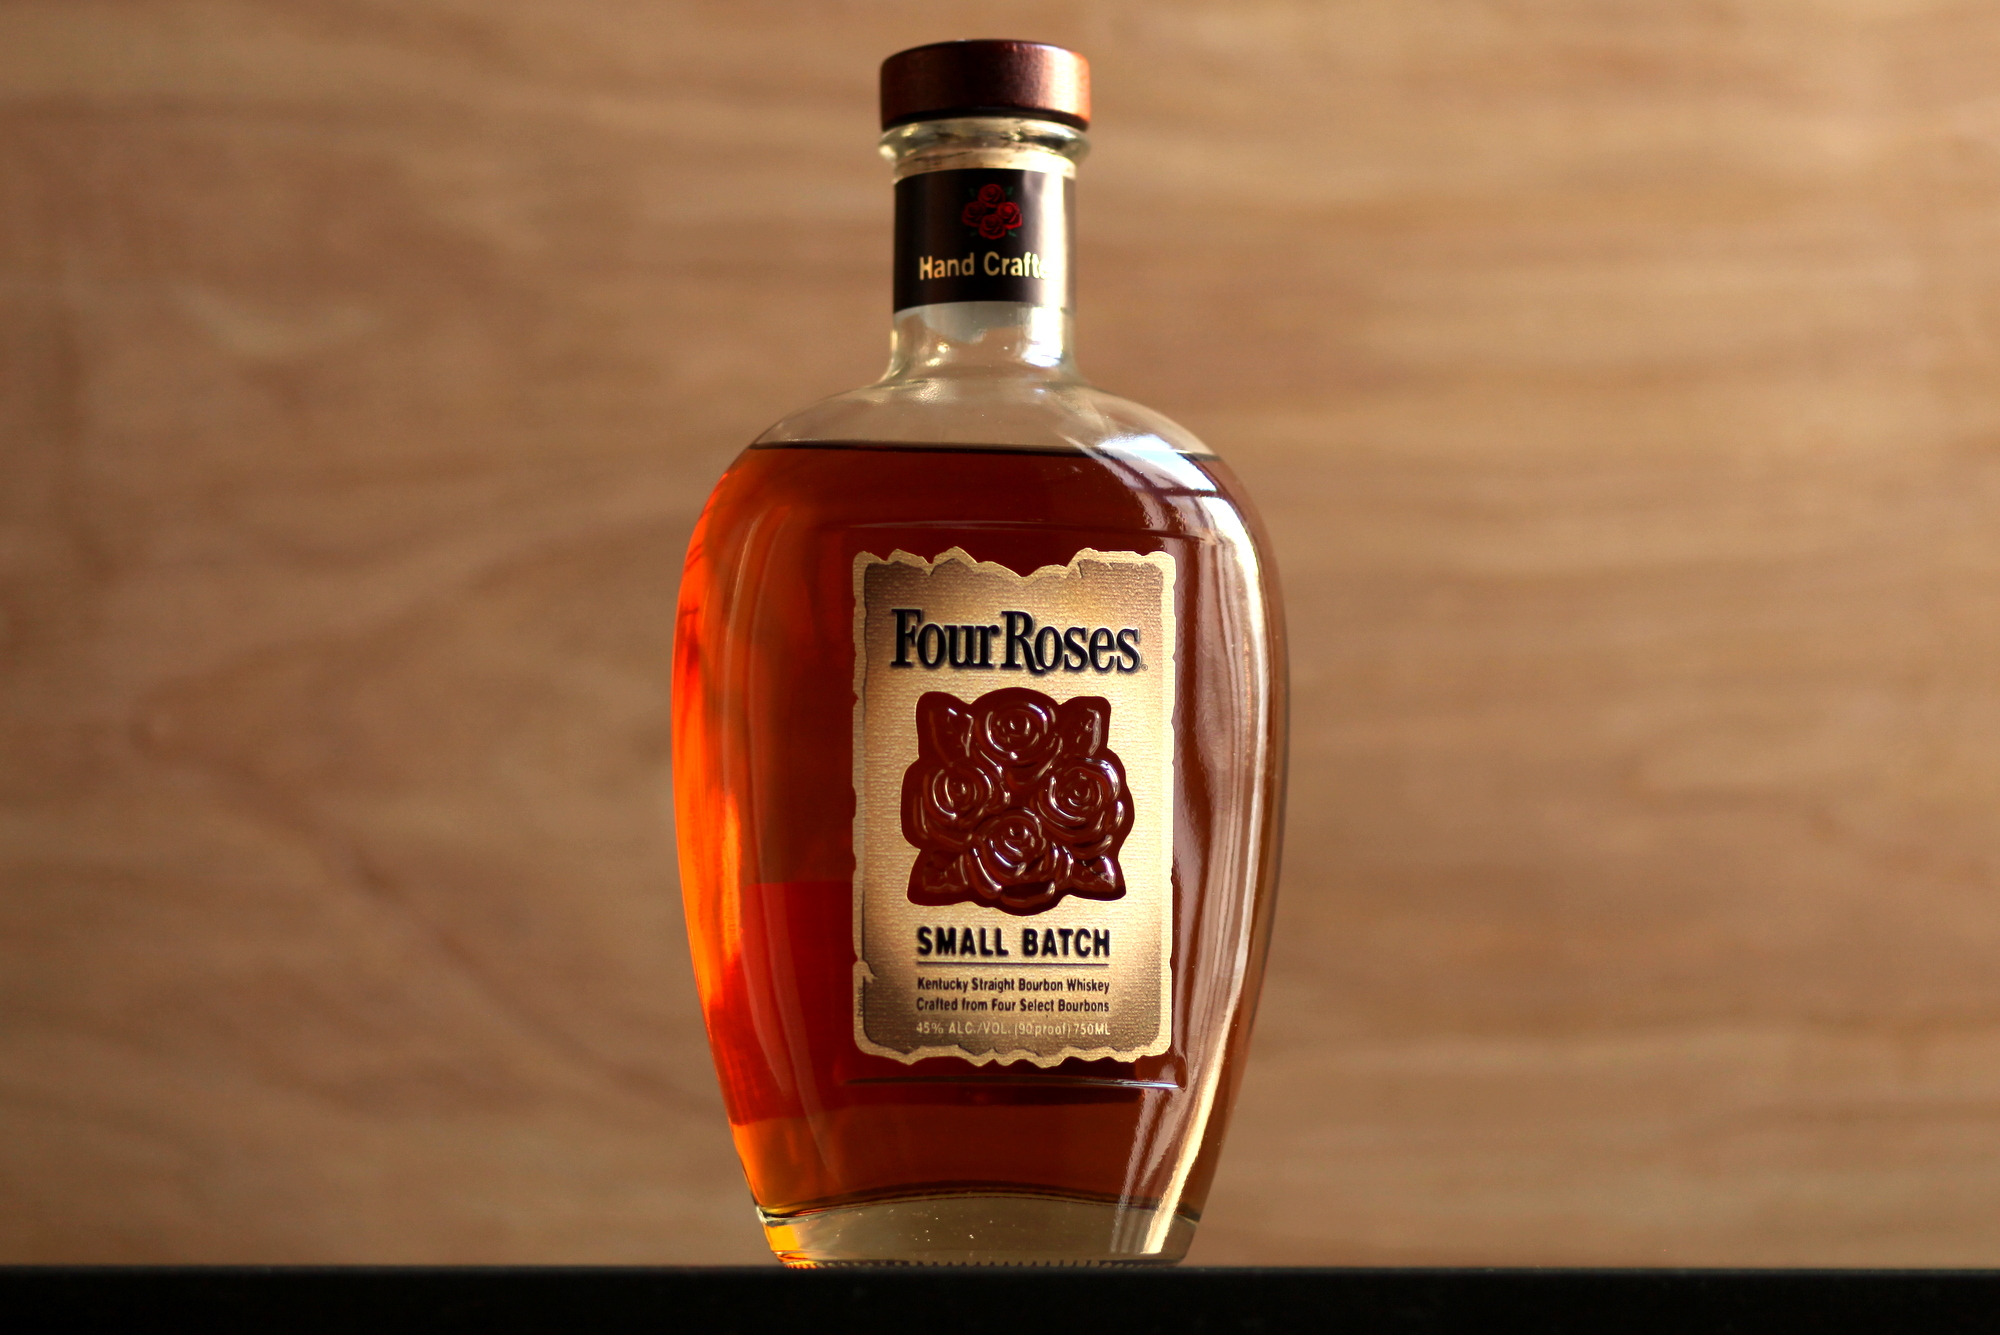 Four Roses Small Batch Review